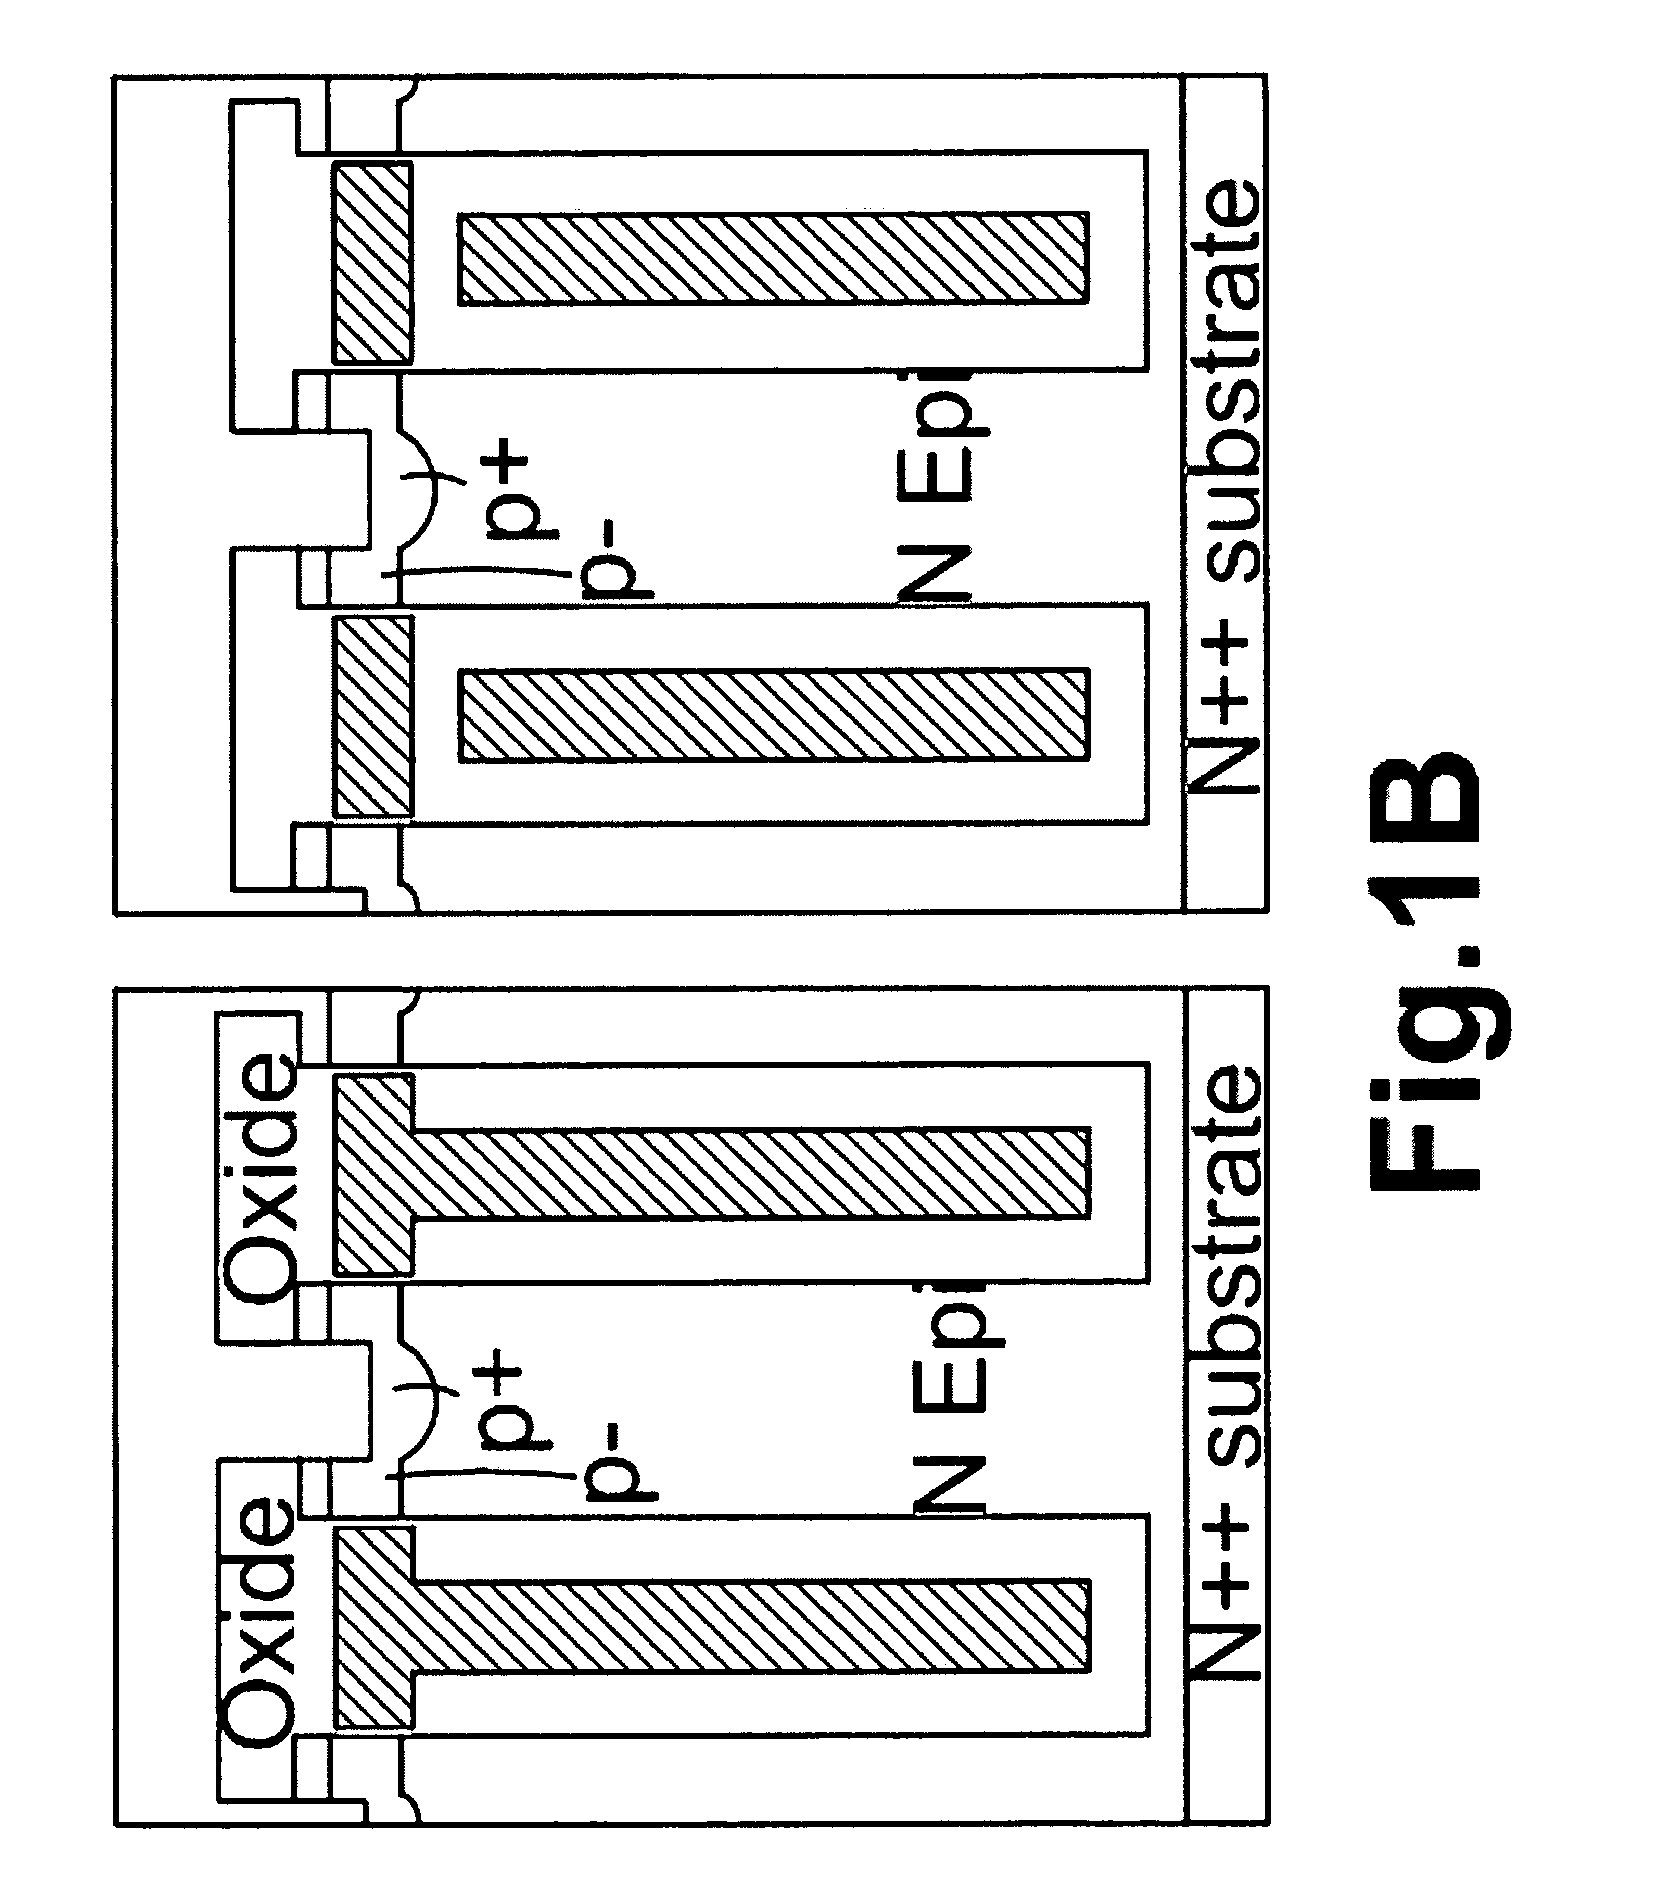 Super-junction trench MOSFET with resurf step oxide and the method to make the same